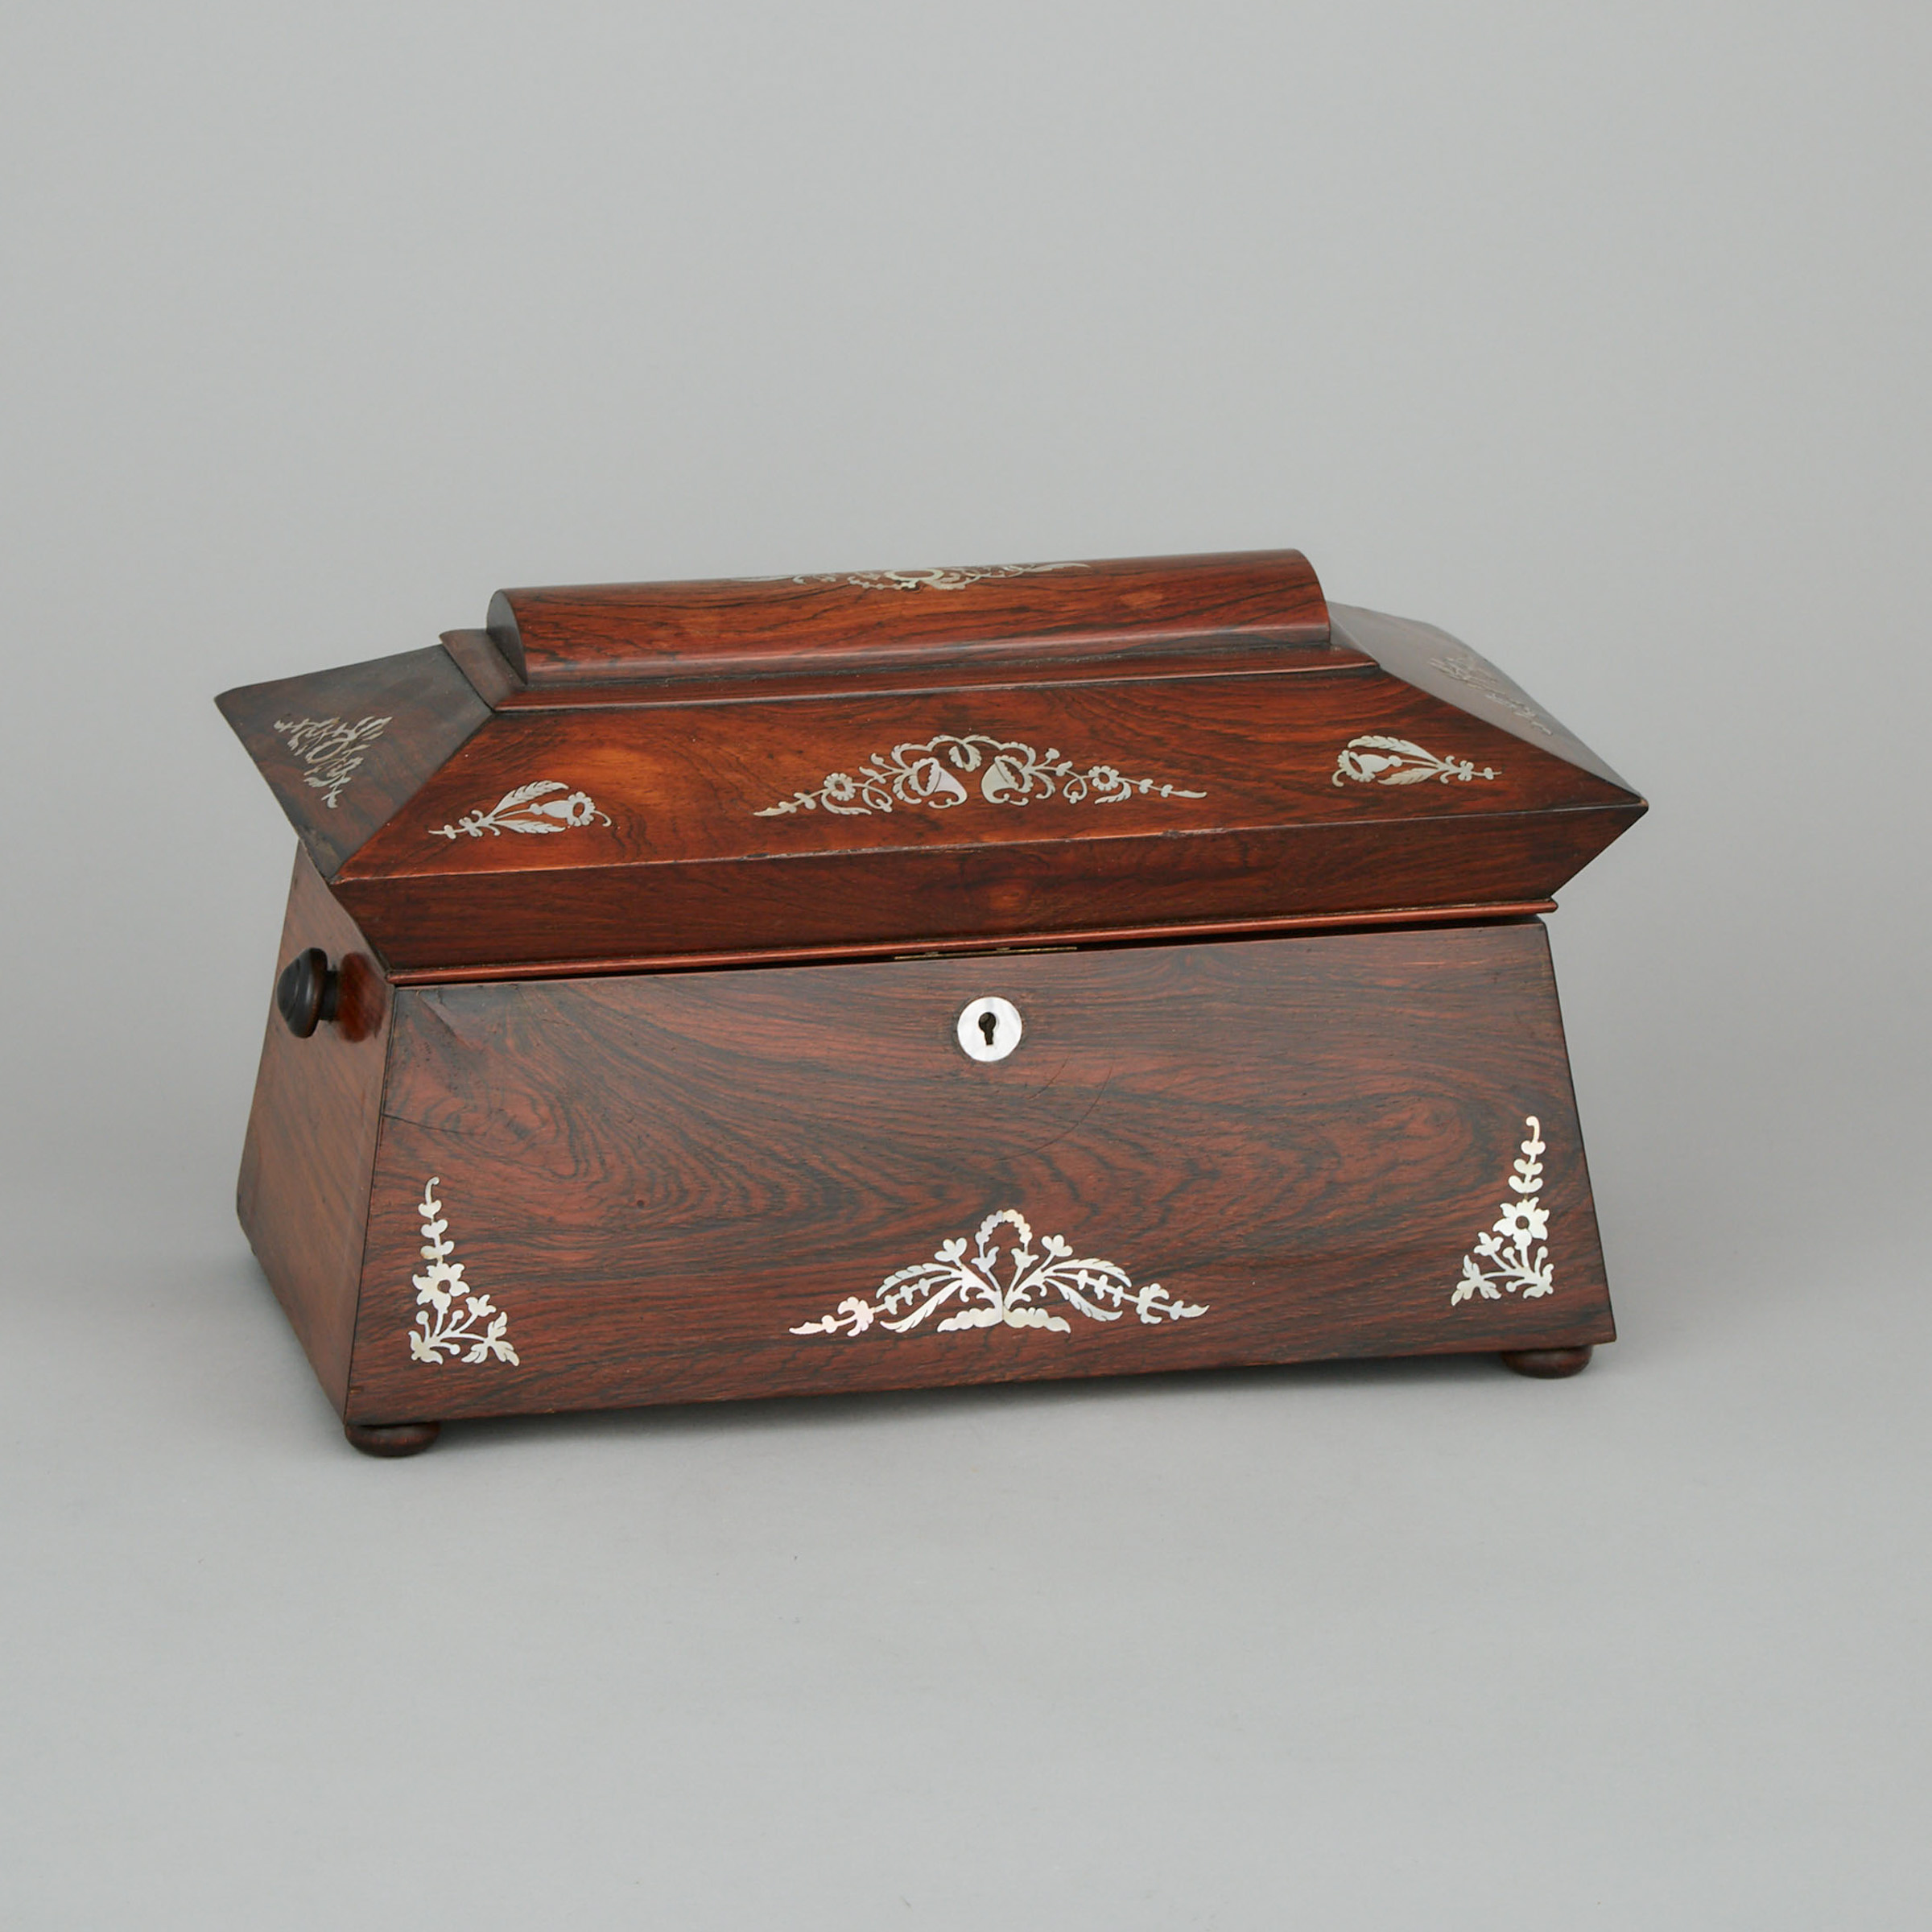 Large Victorian Abalone Inlaid Rosewood Sarcophagus Form Tea Caddy, mid 19th century